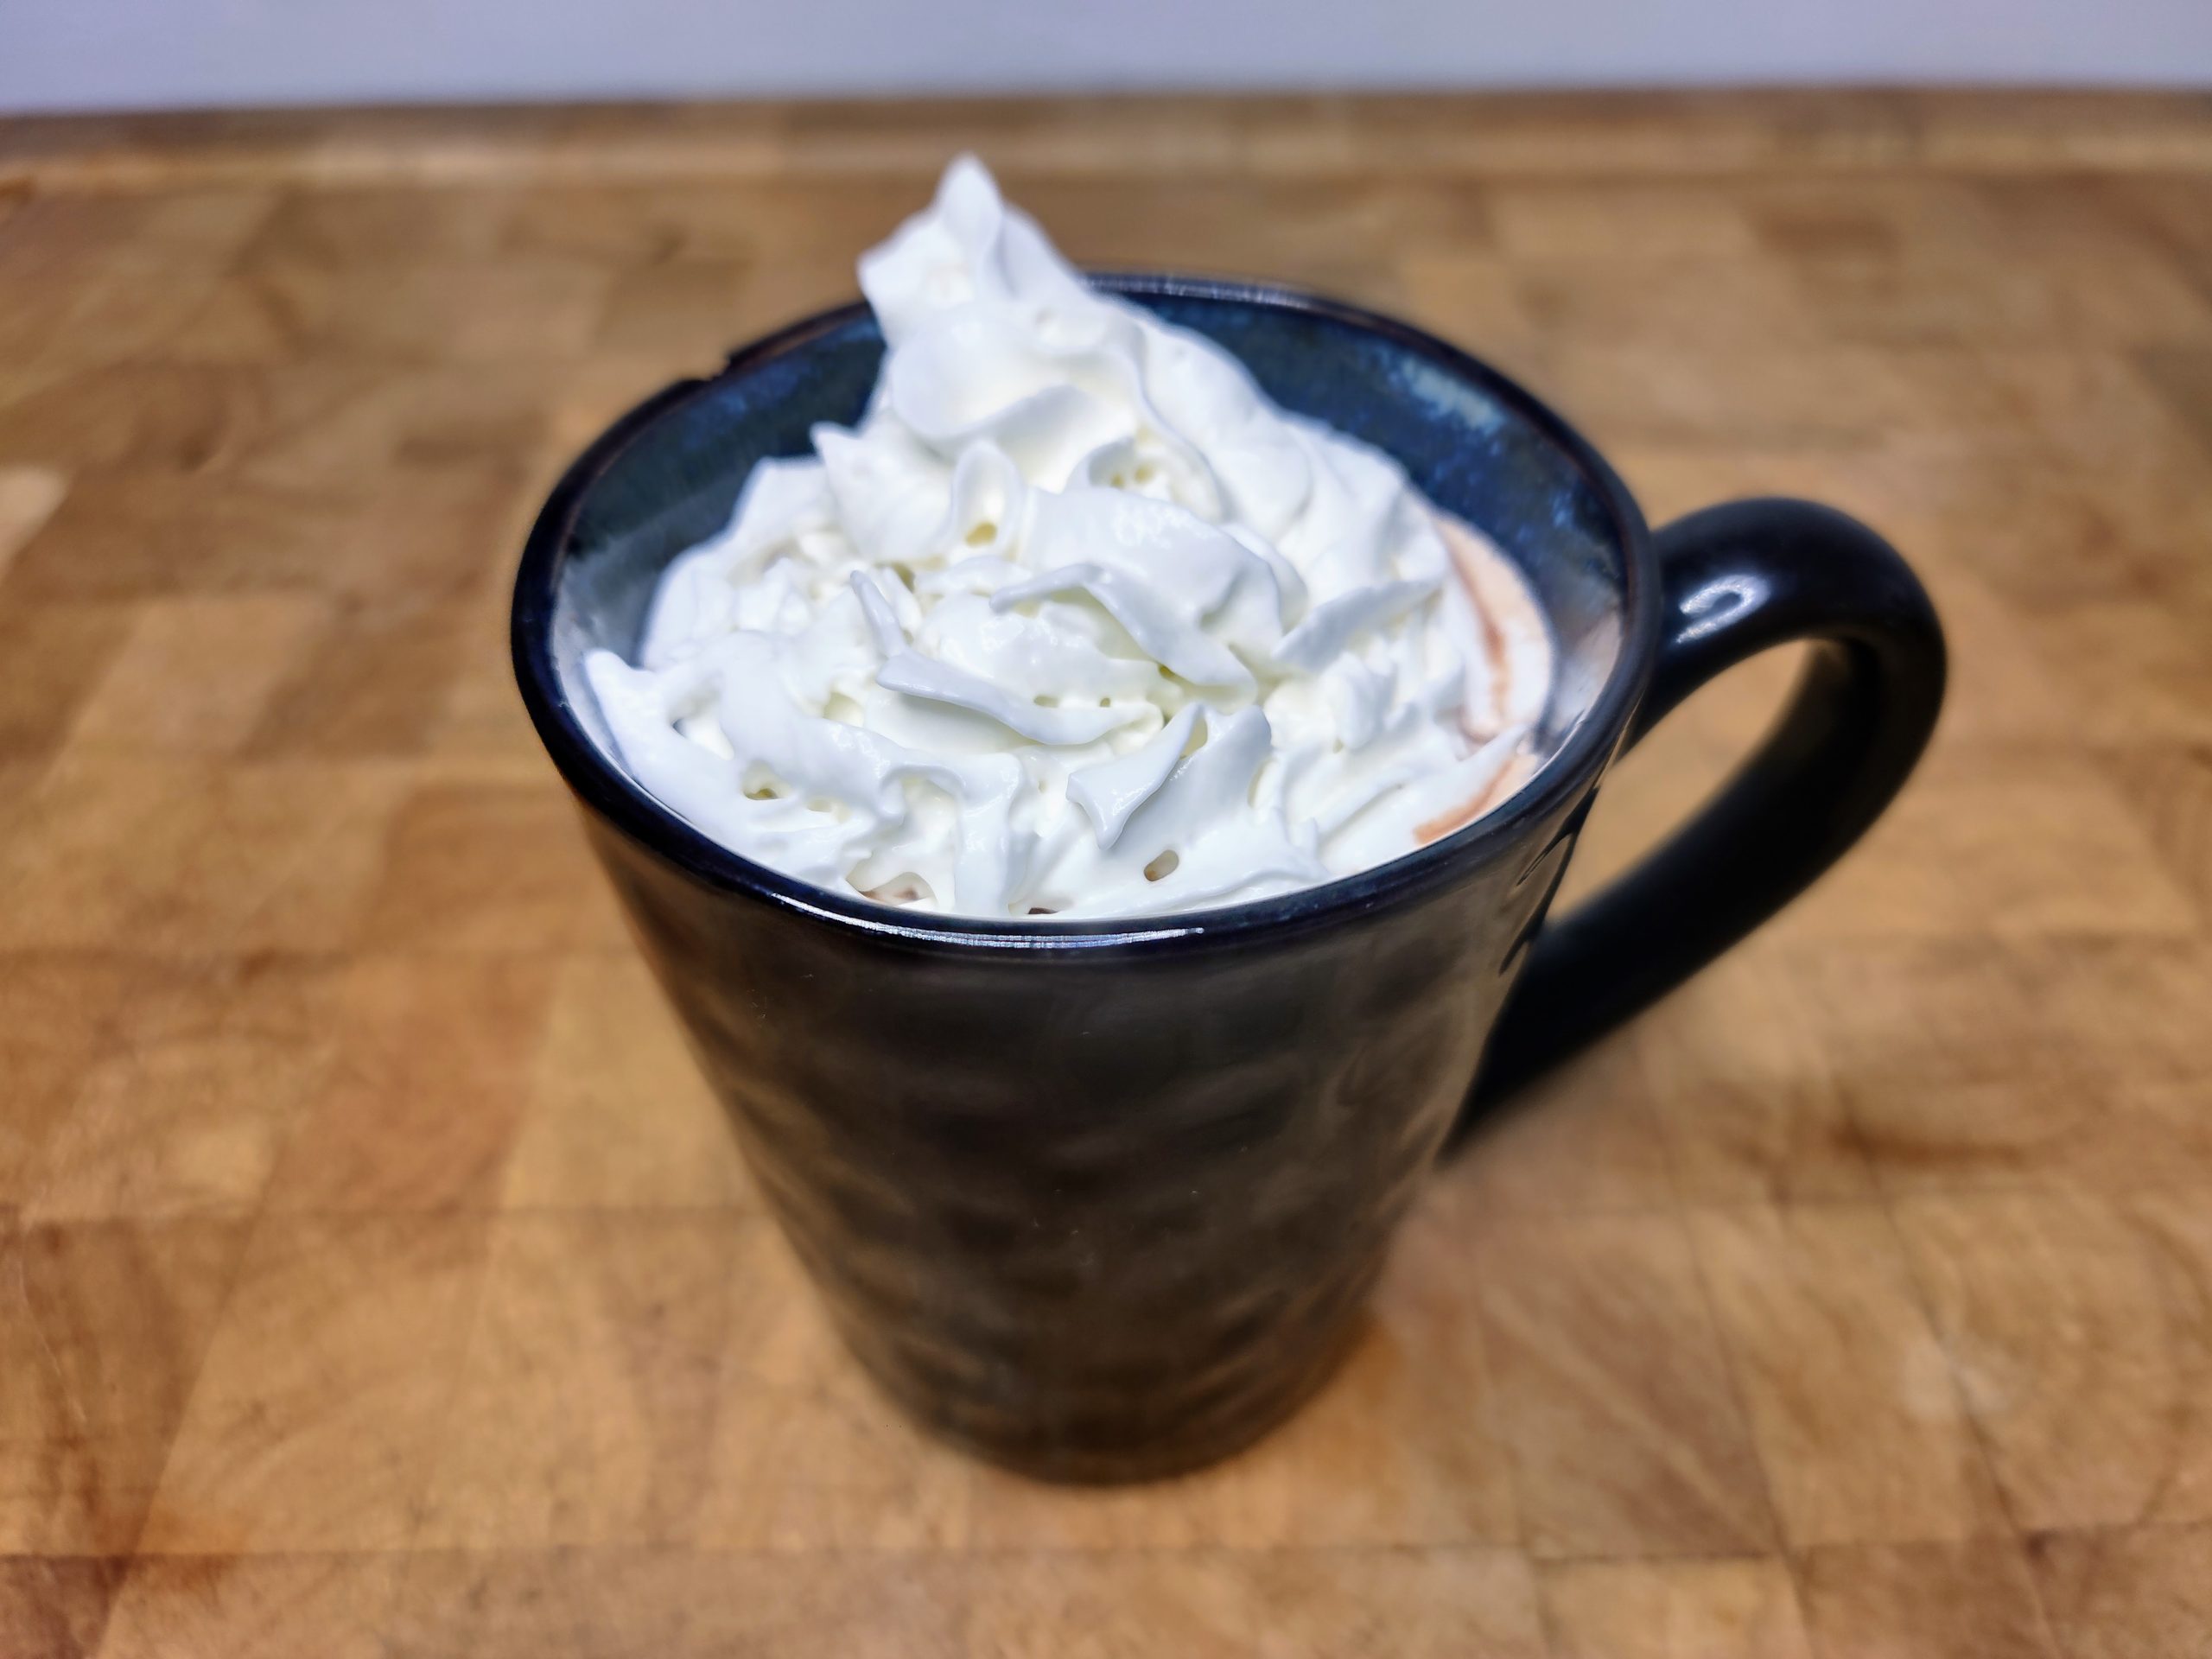 Vodka hot chocolate topped with whipped cream in a blue mug on a wooden table.